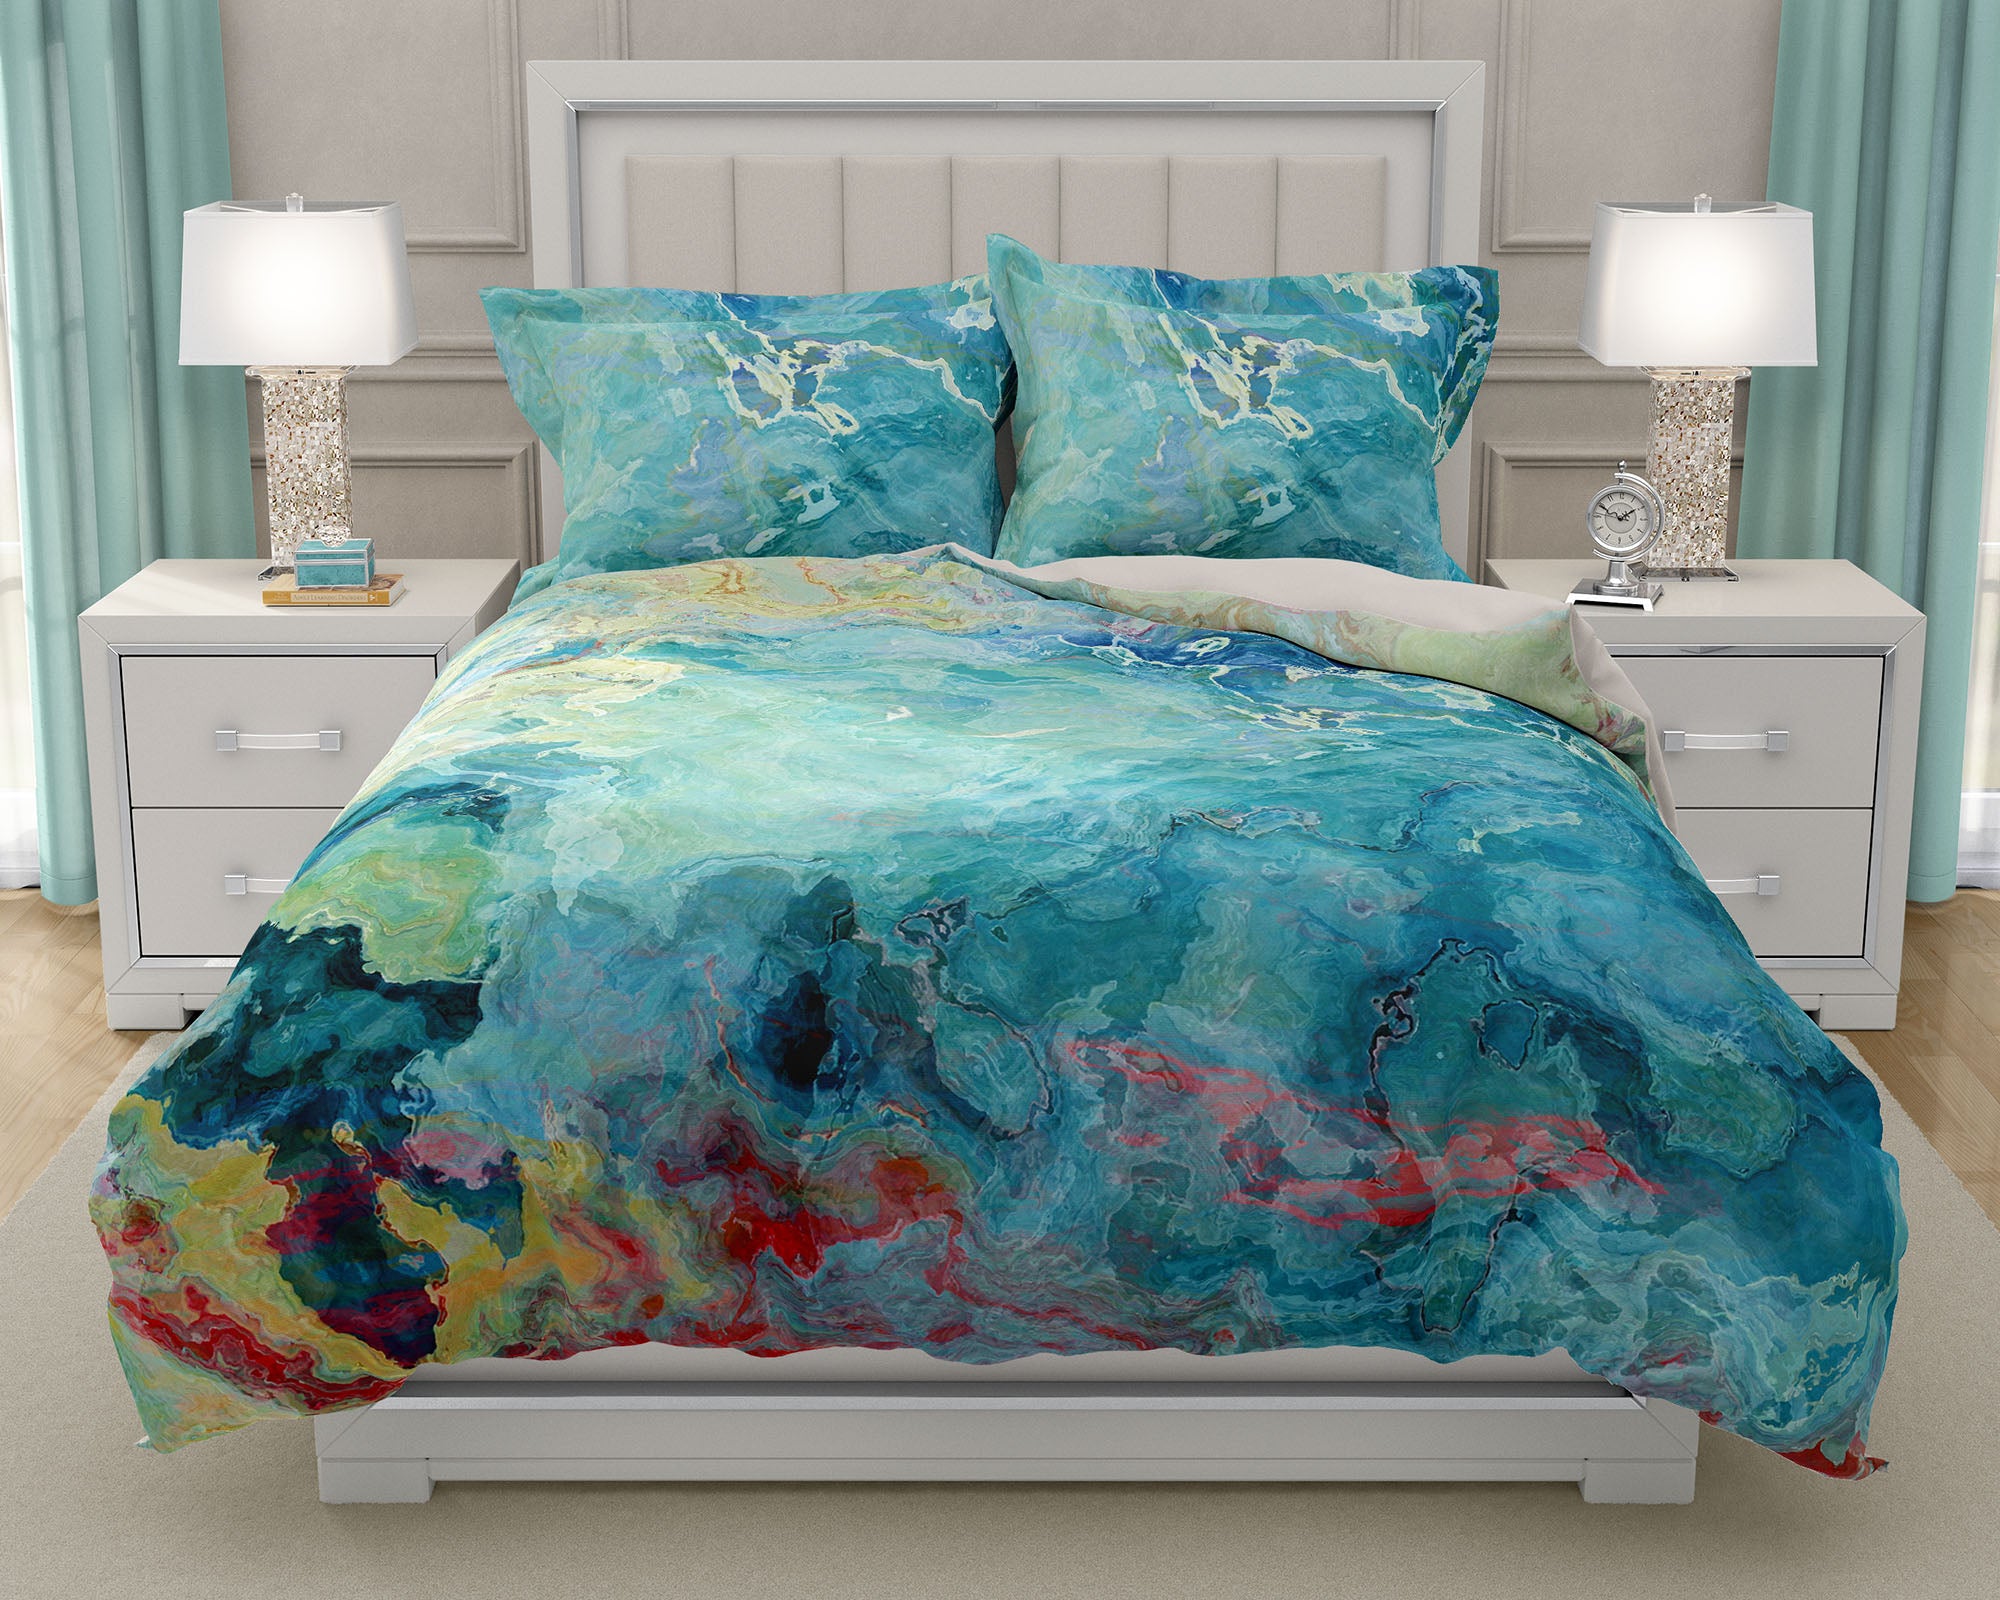 King Or Queen Duvet Cover Cool Cucumber